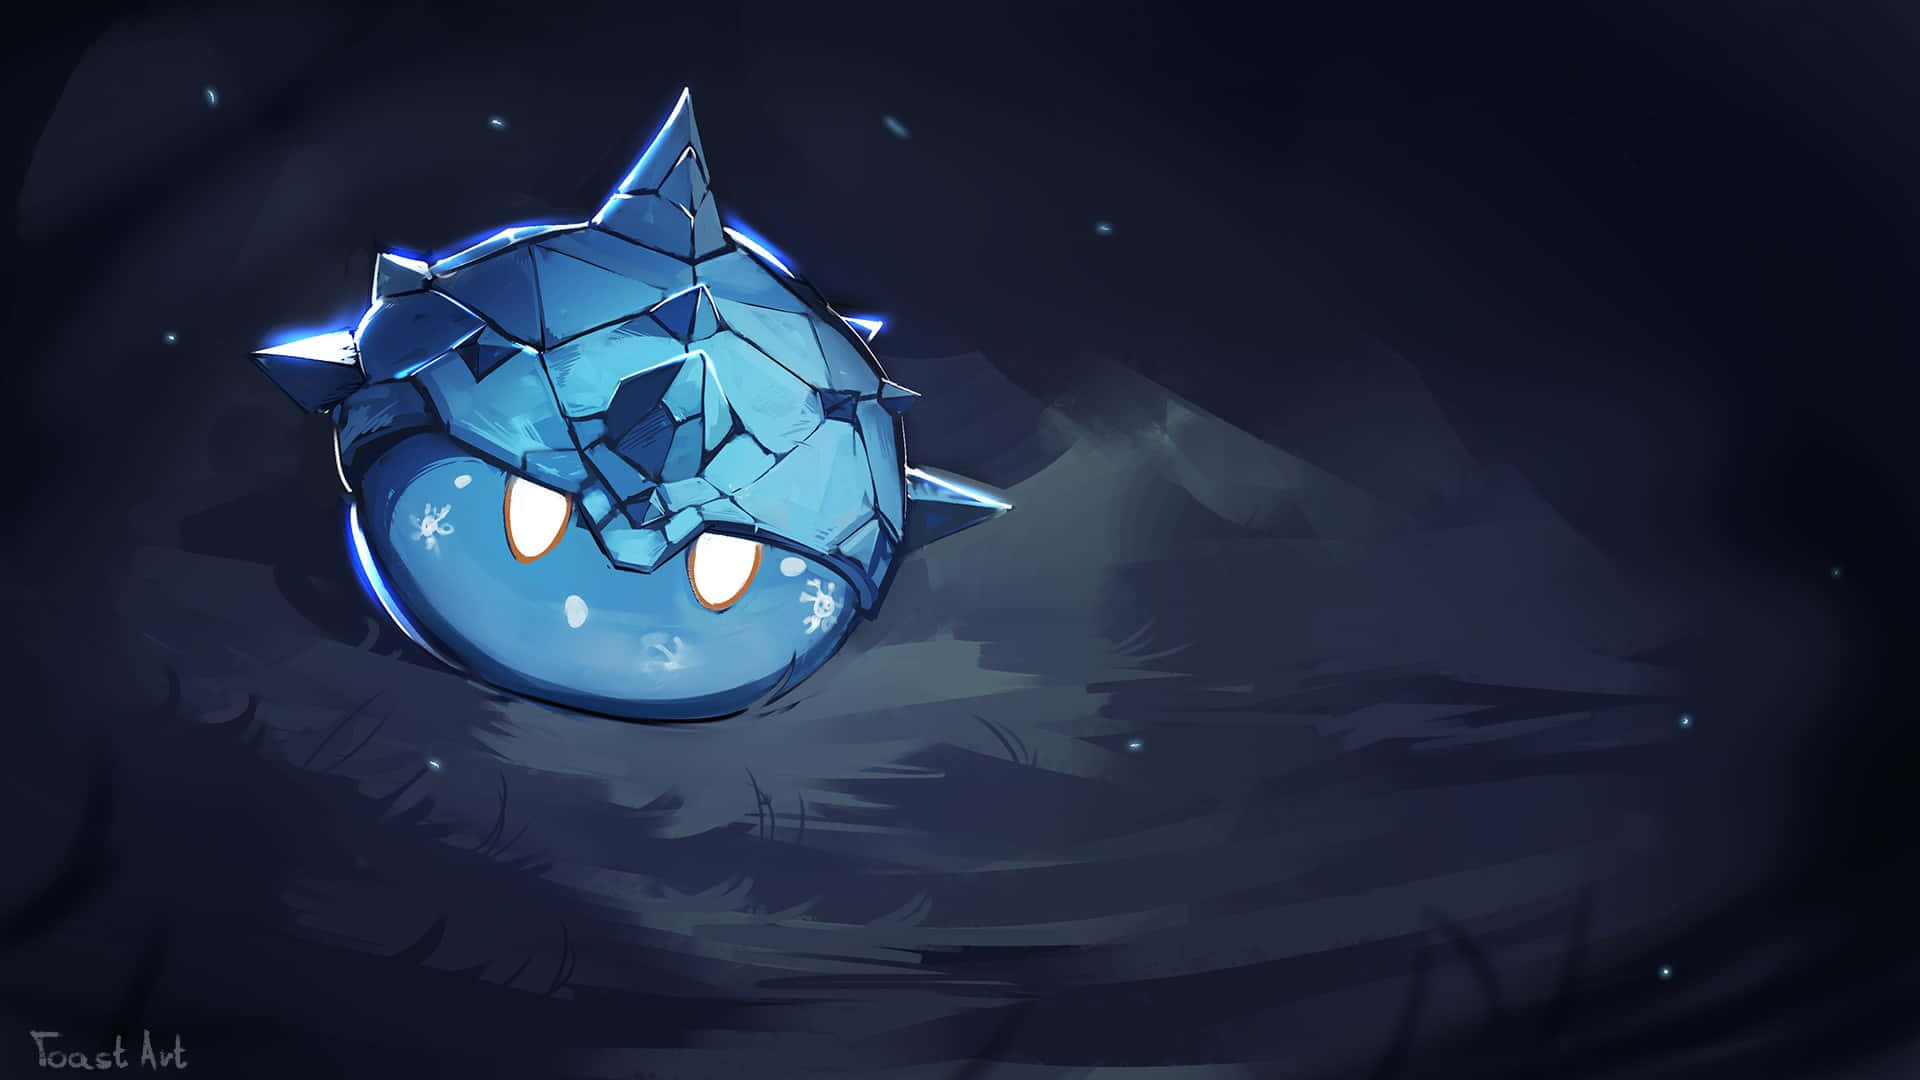 A Blue Ball With Spikes In The Middle Of The Dark Background